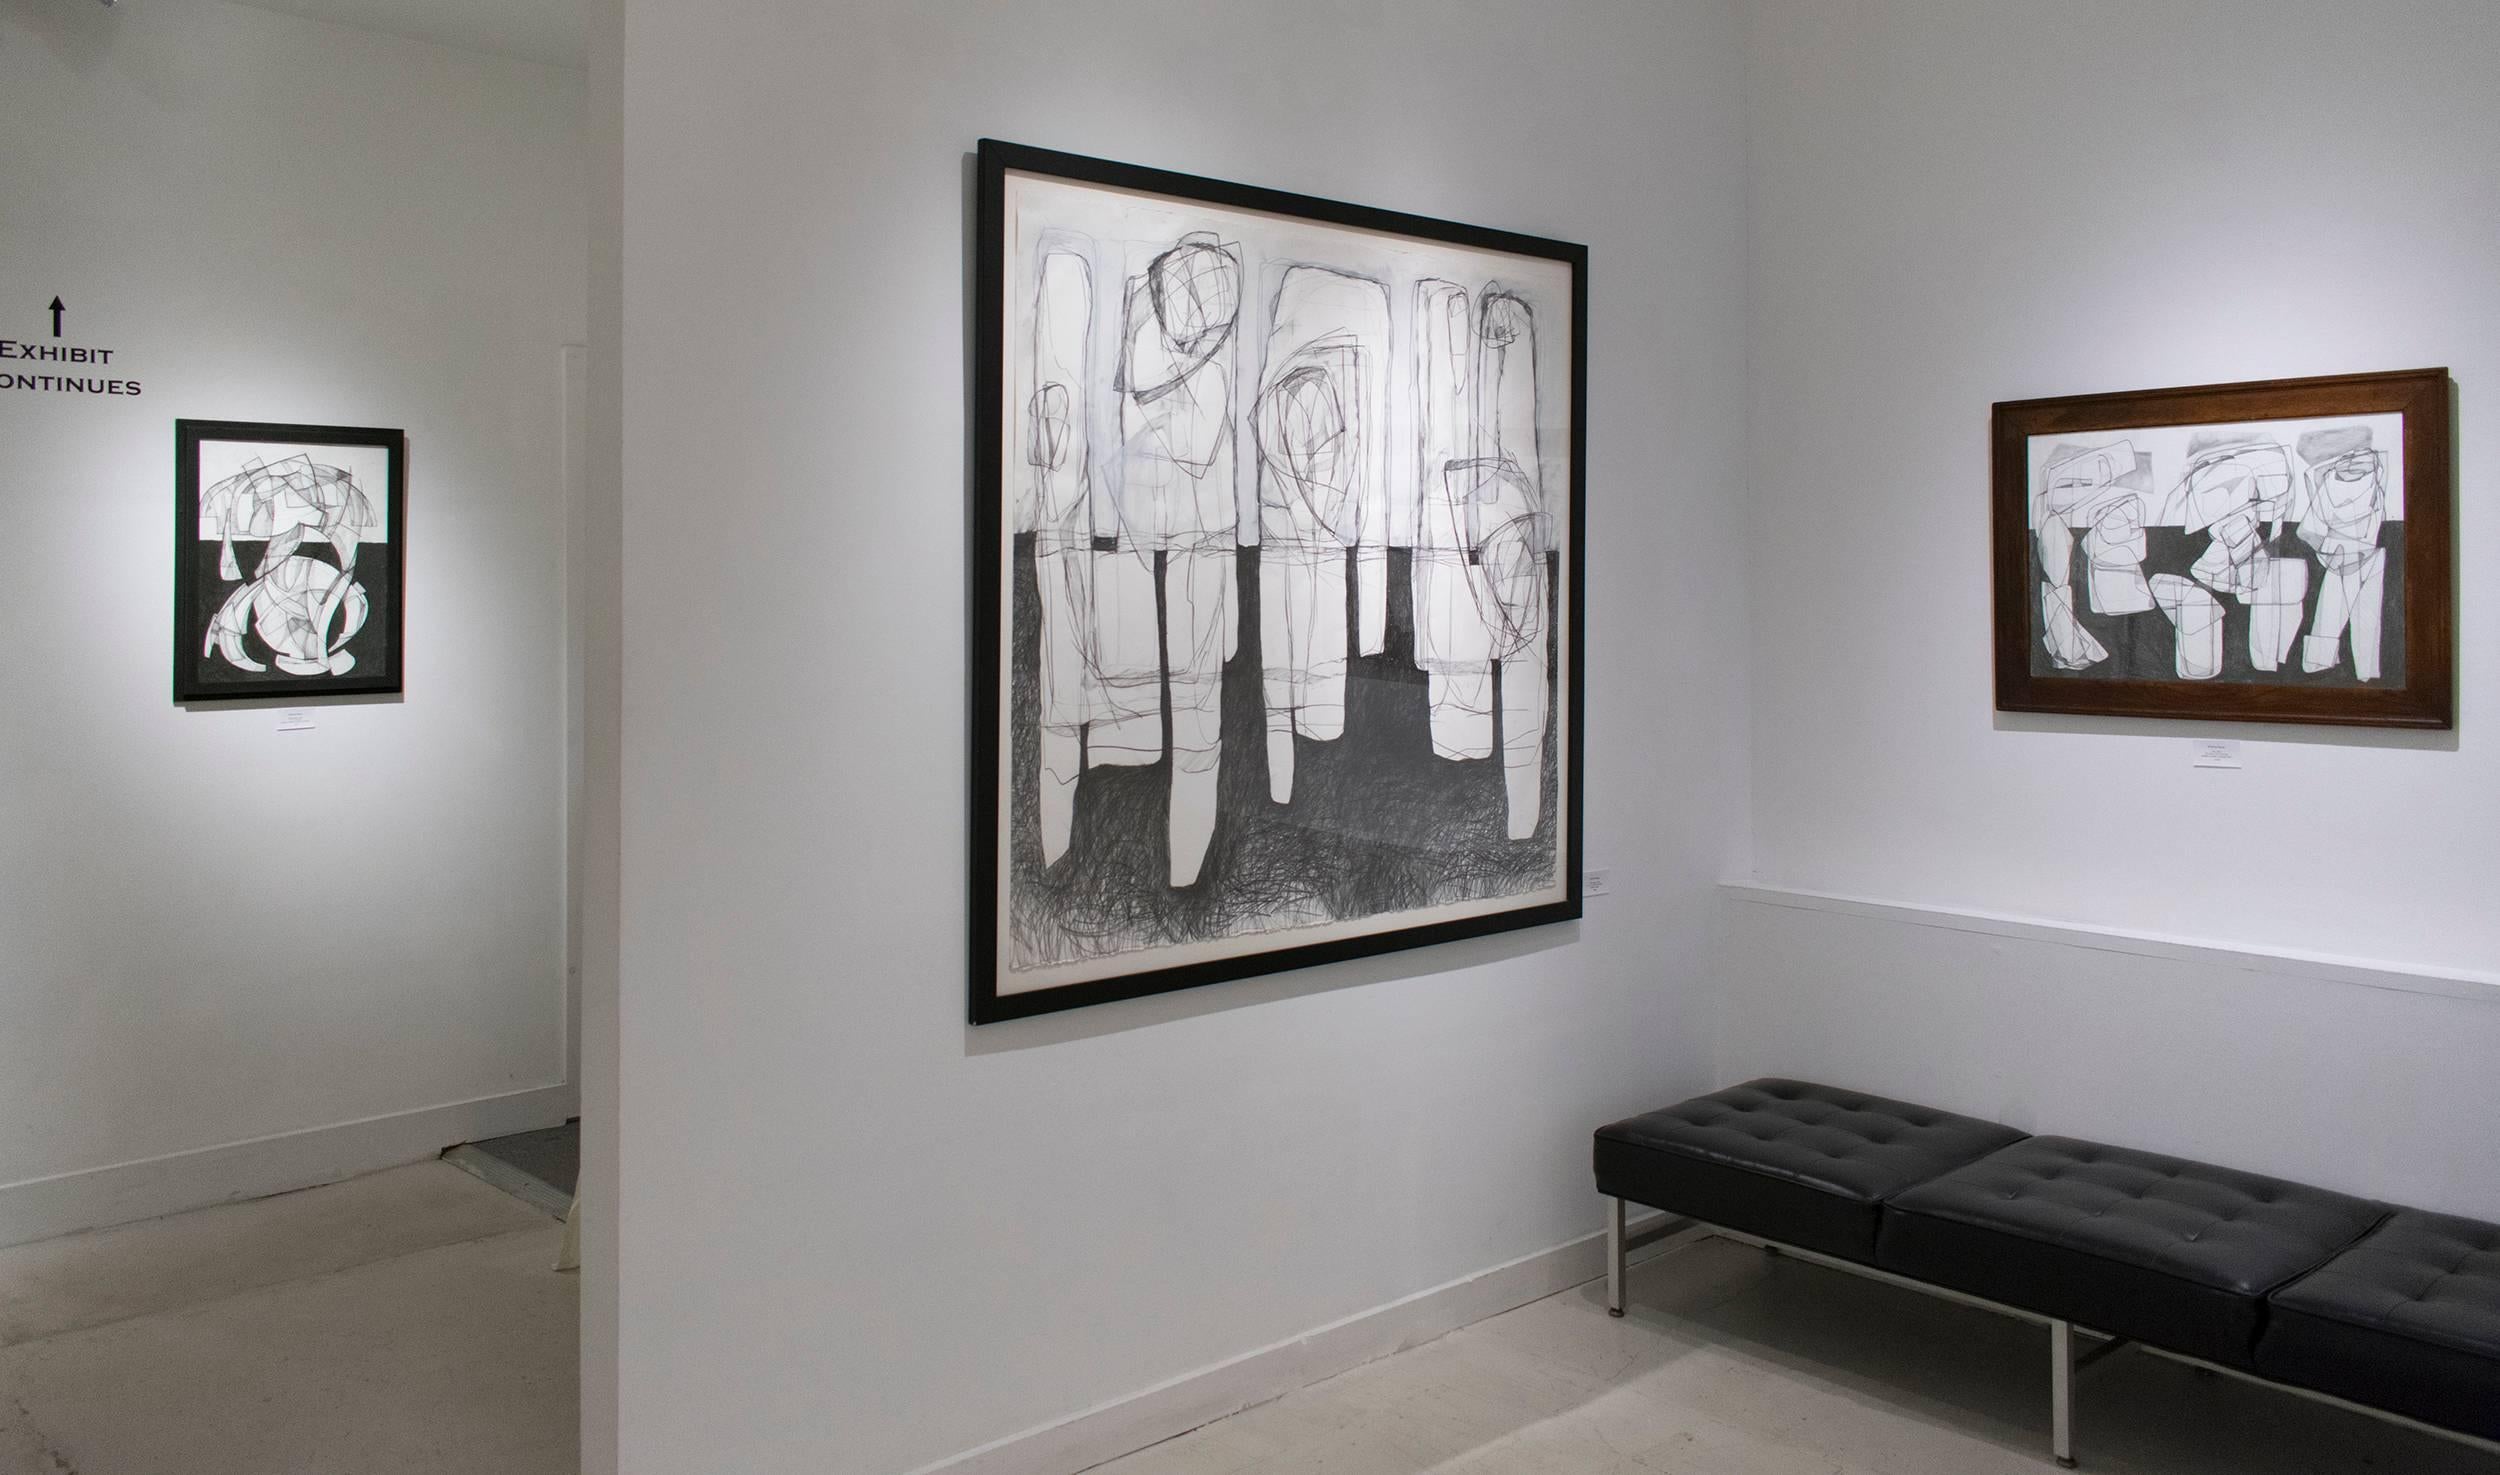 Three Figures (Black & White Abstract Graphite Drawing in Contemporary Frame) - Gray Figurative Art by David Dew Bruner